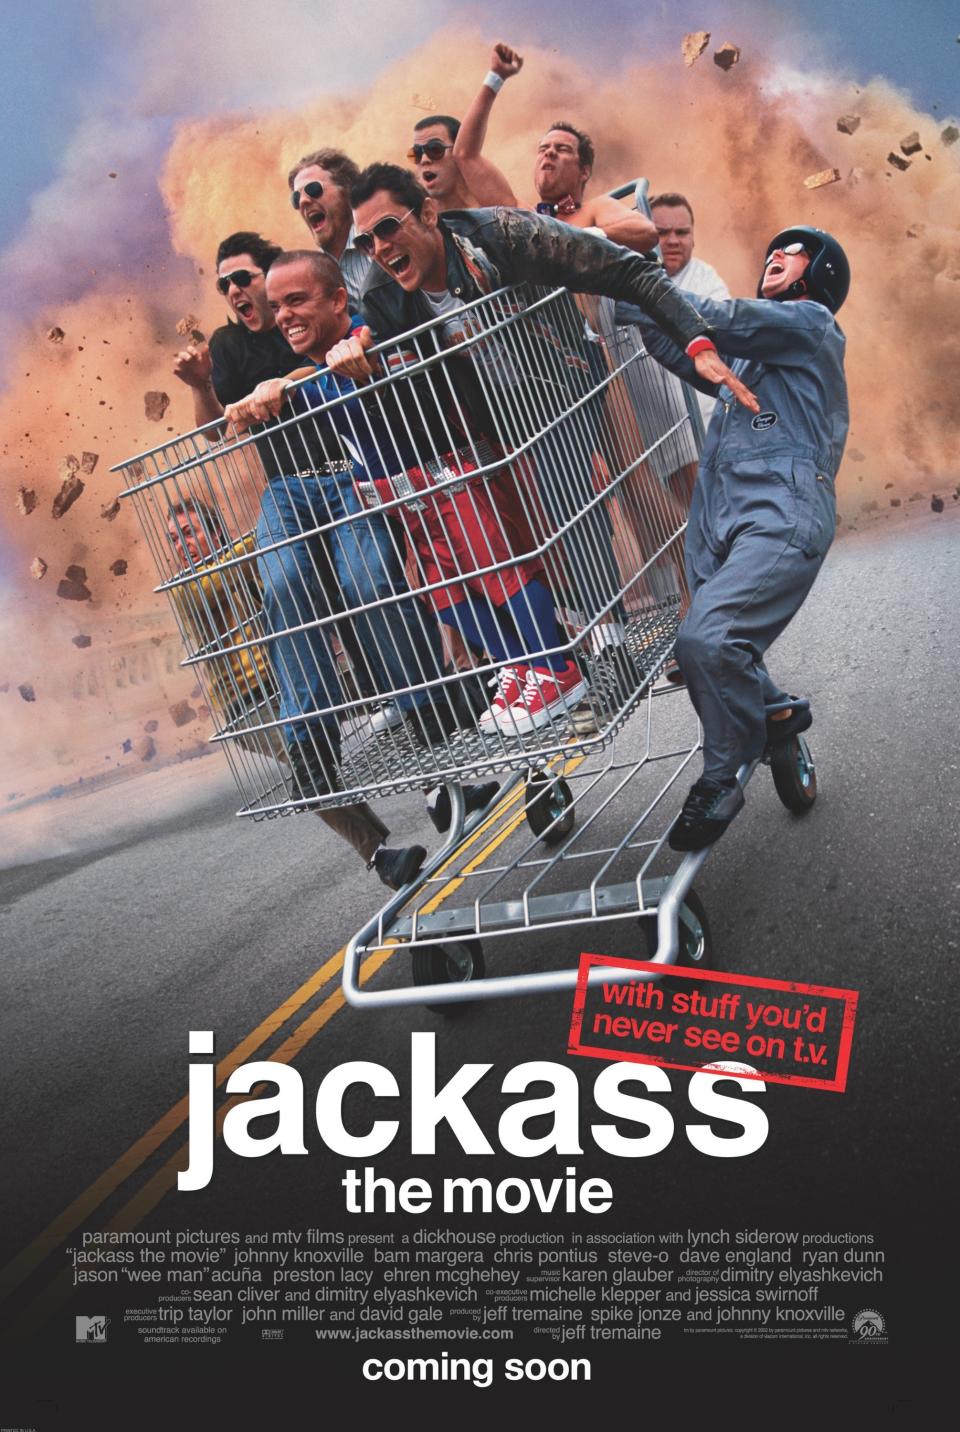 The poster for Jackass the movie